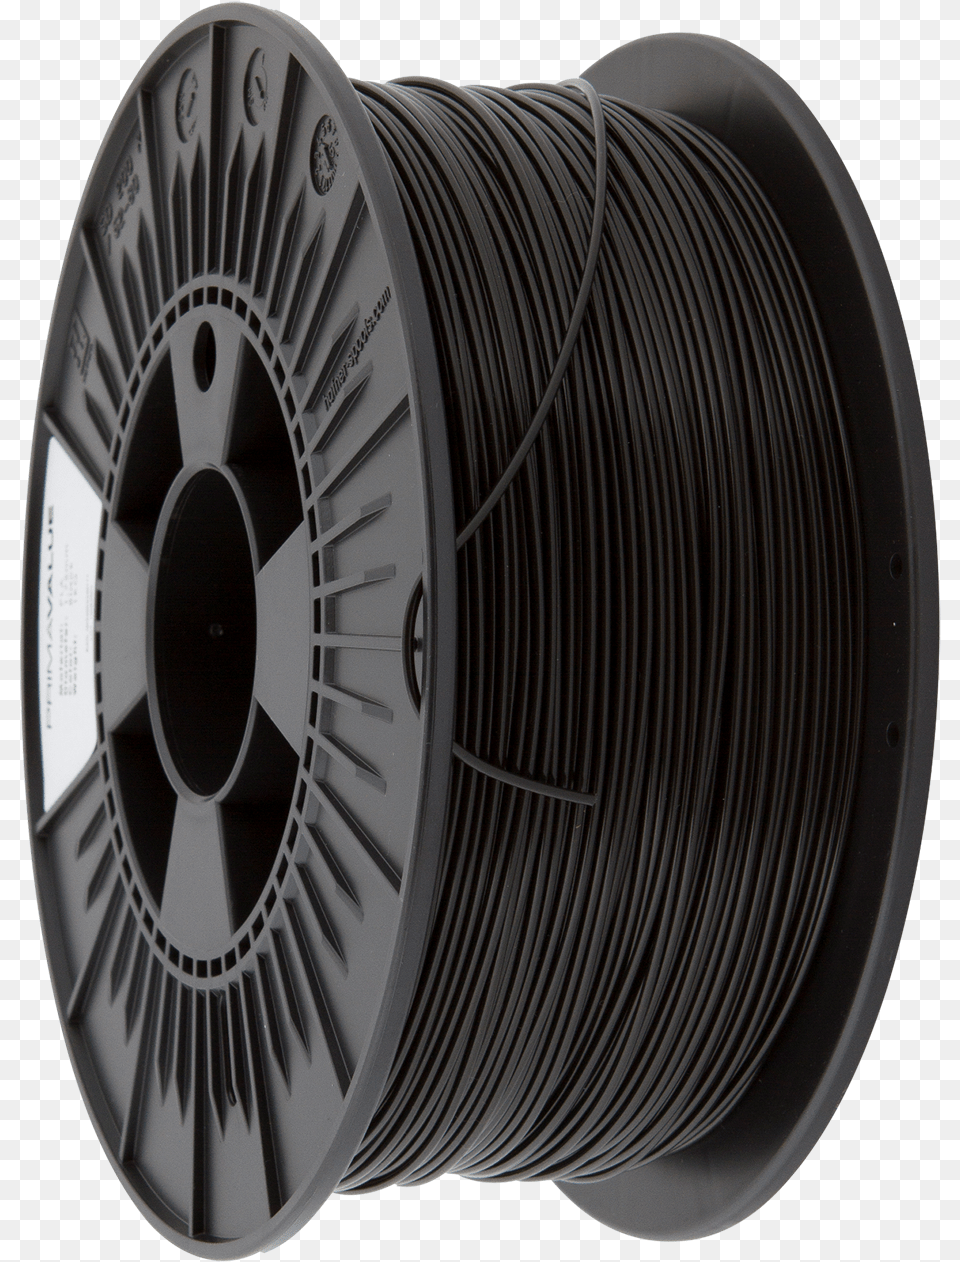 Primavalue Abs Filament Pla Spool Free Png Download